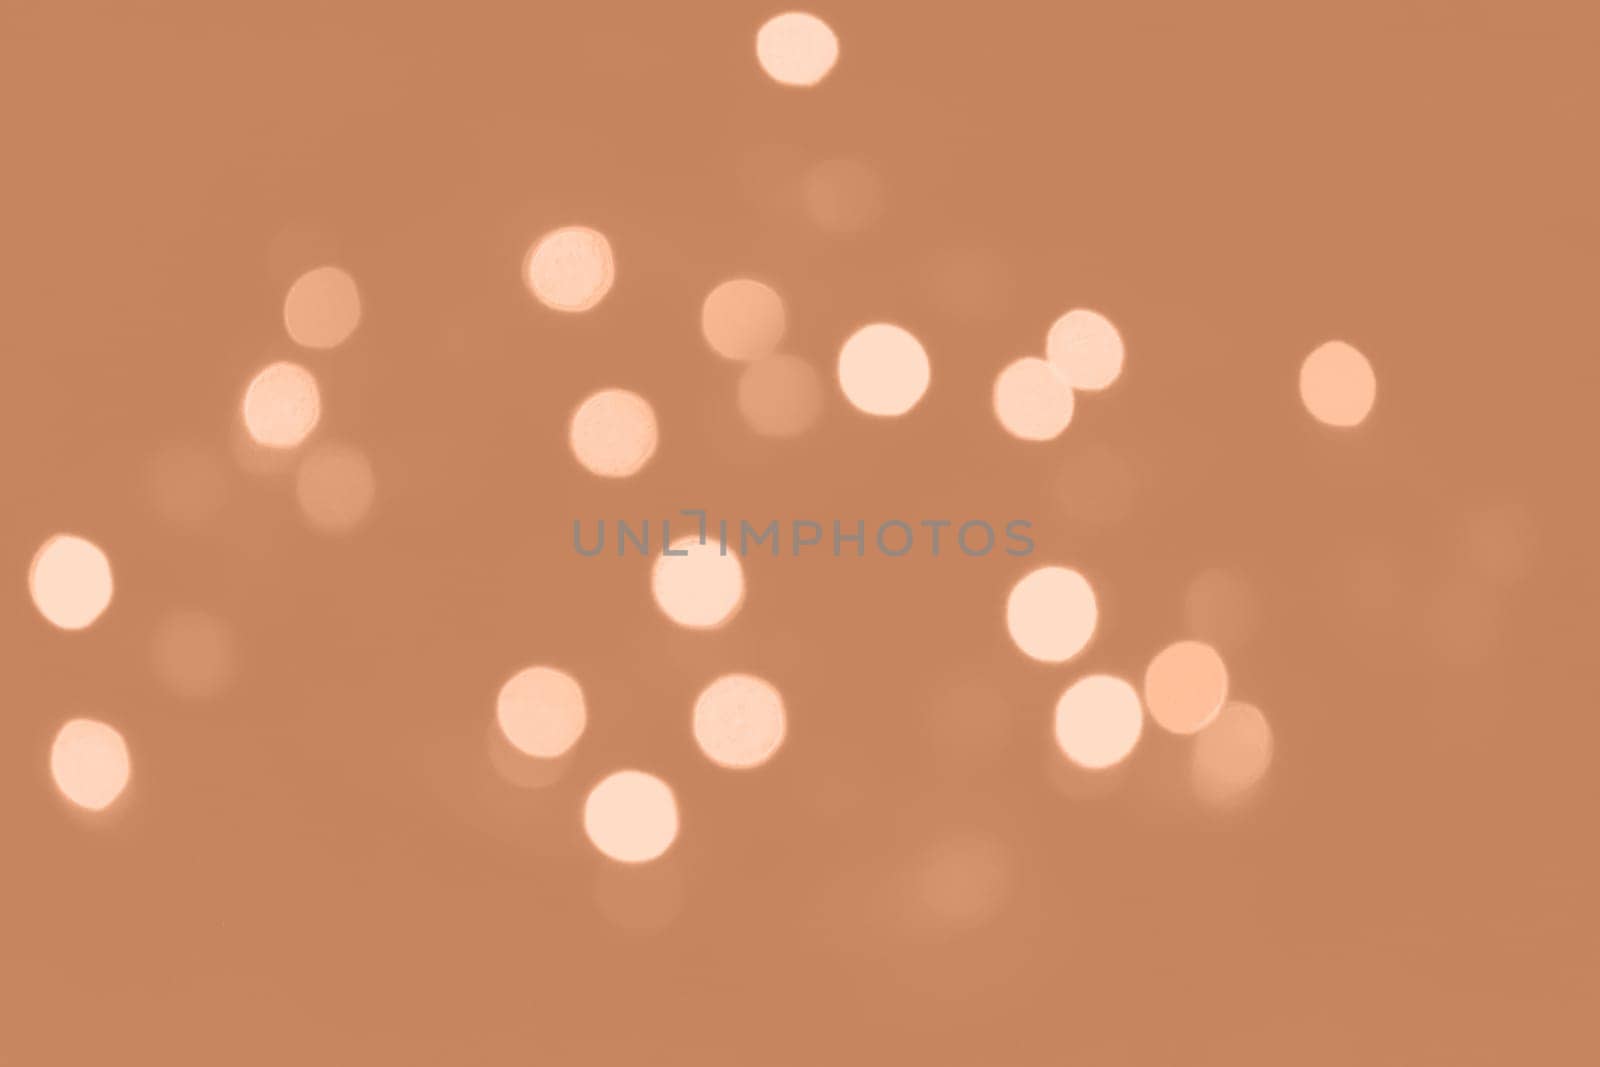 Peach Fuzz lights bokeh background, Chrismas lights bokeh. Monochrome abstract background. Blurred and glowing lights. Classic blue bokeh lens effect from lighting spots. High quality photo